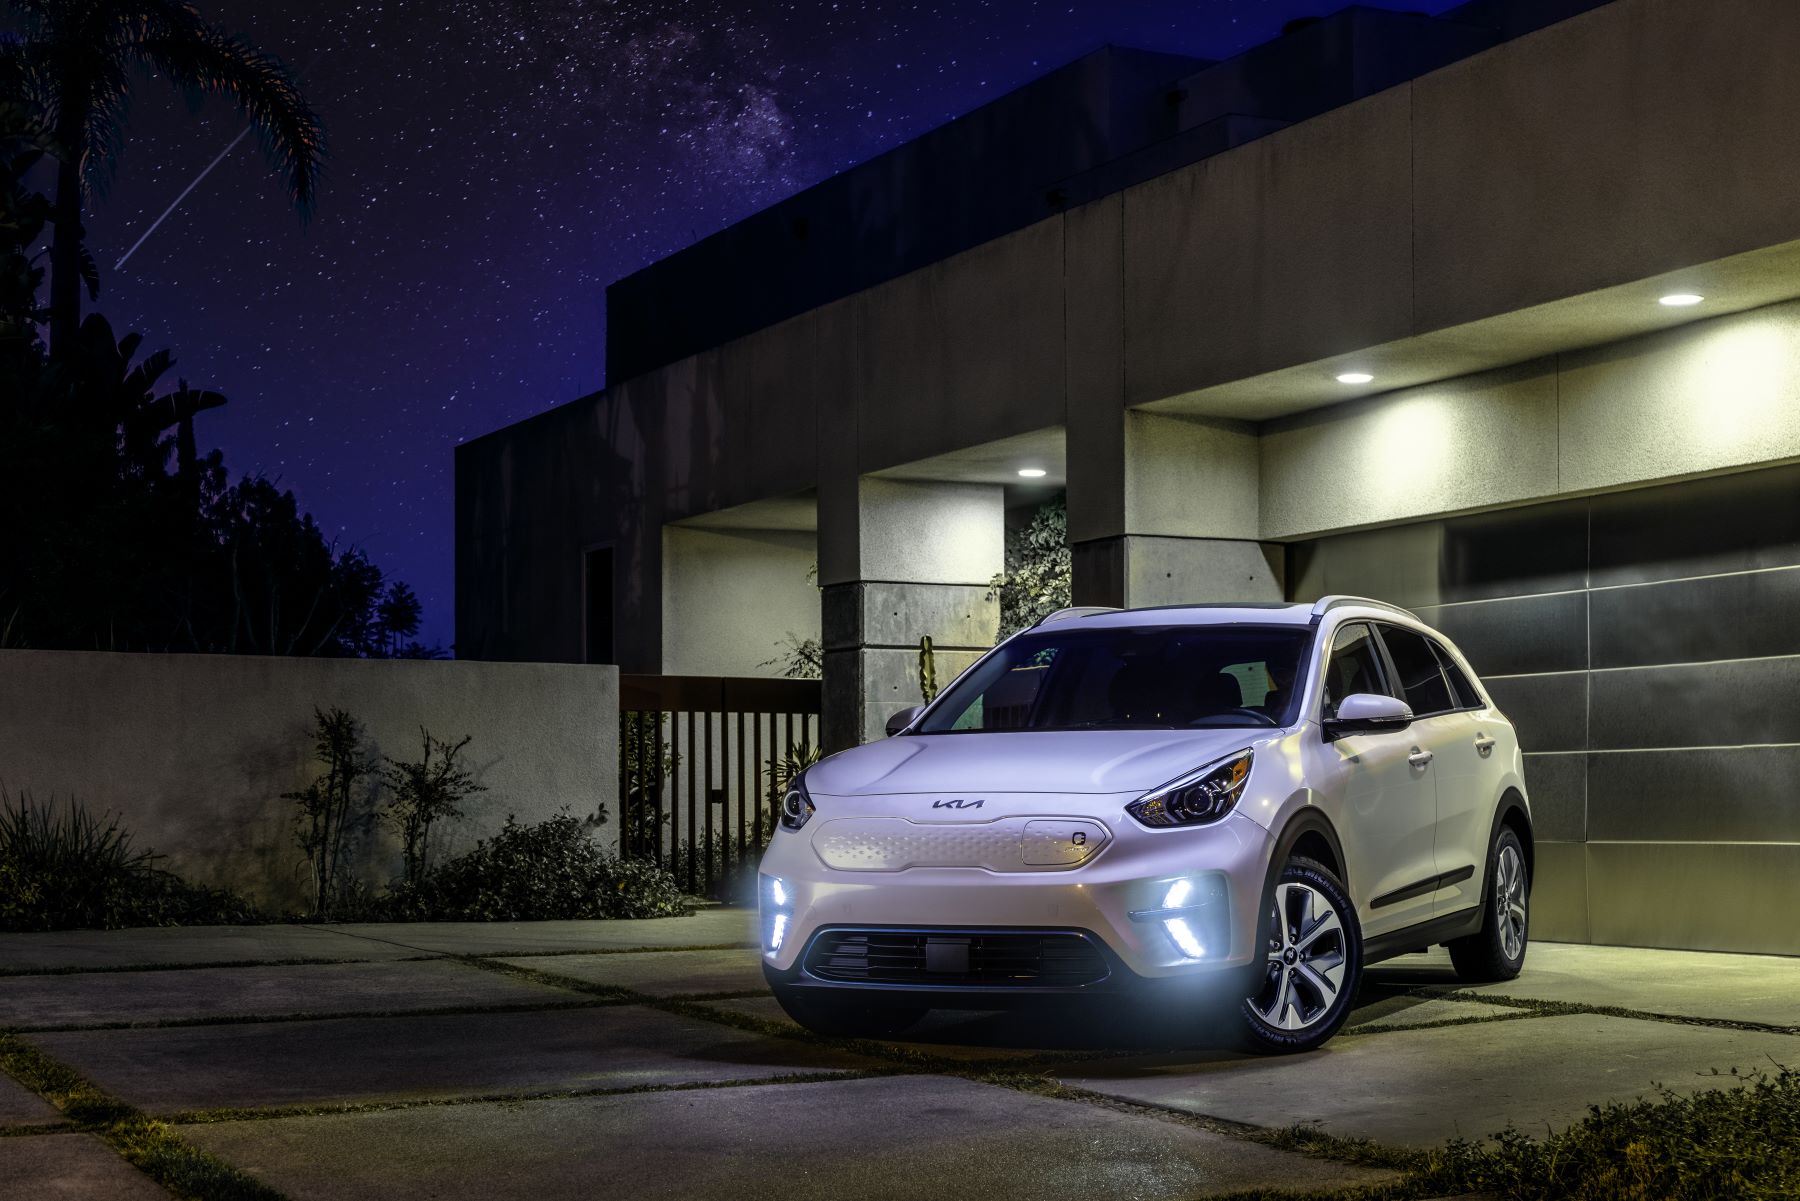 A white 2022 Kia Niro EV parked outside a garage at night with its headlights on